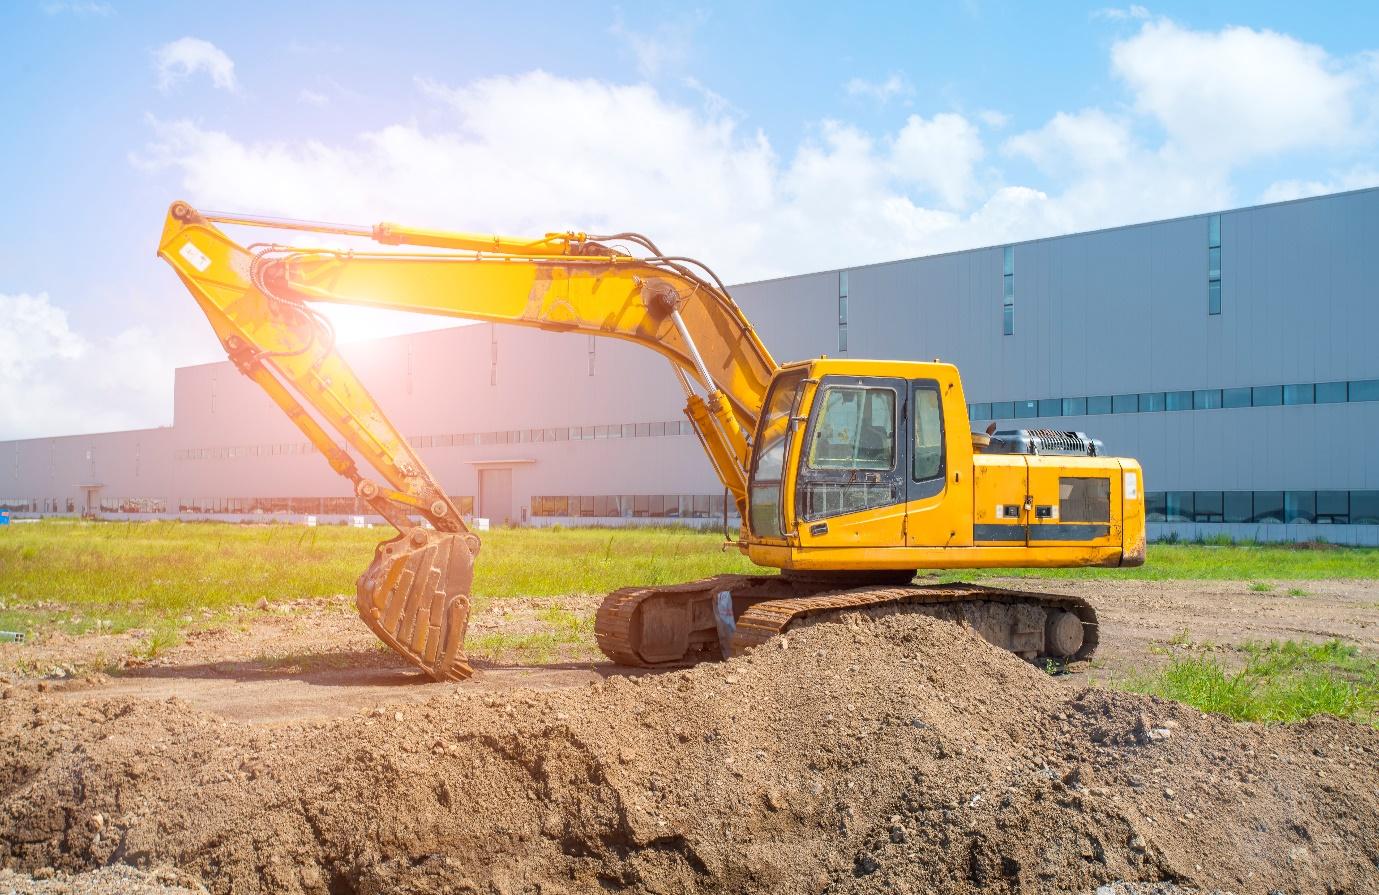 A yellow construction vehicle with a bucket on dirt

Description automatically generated